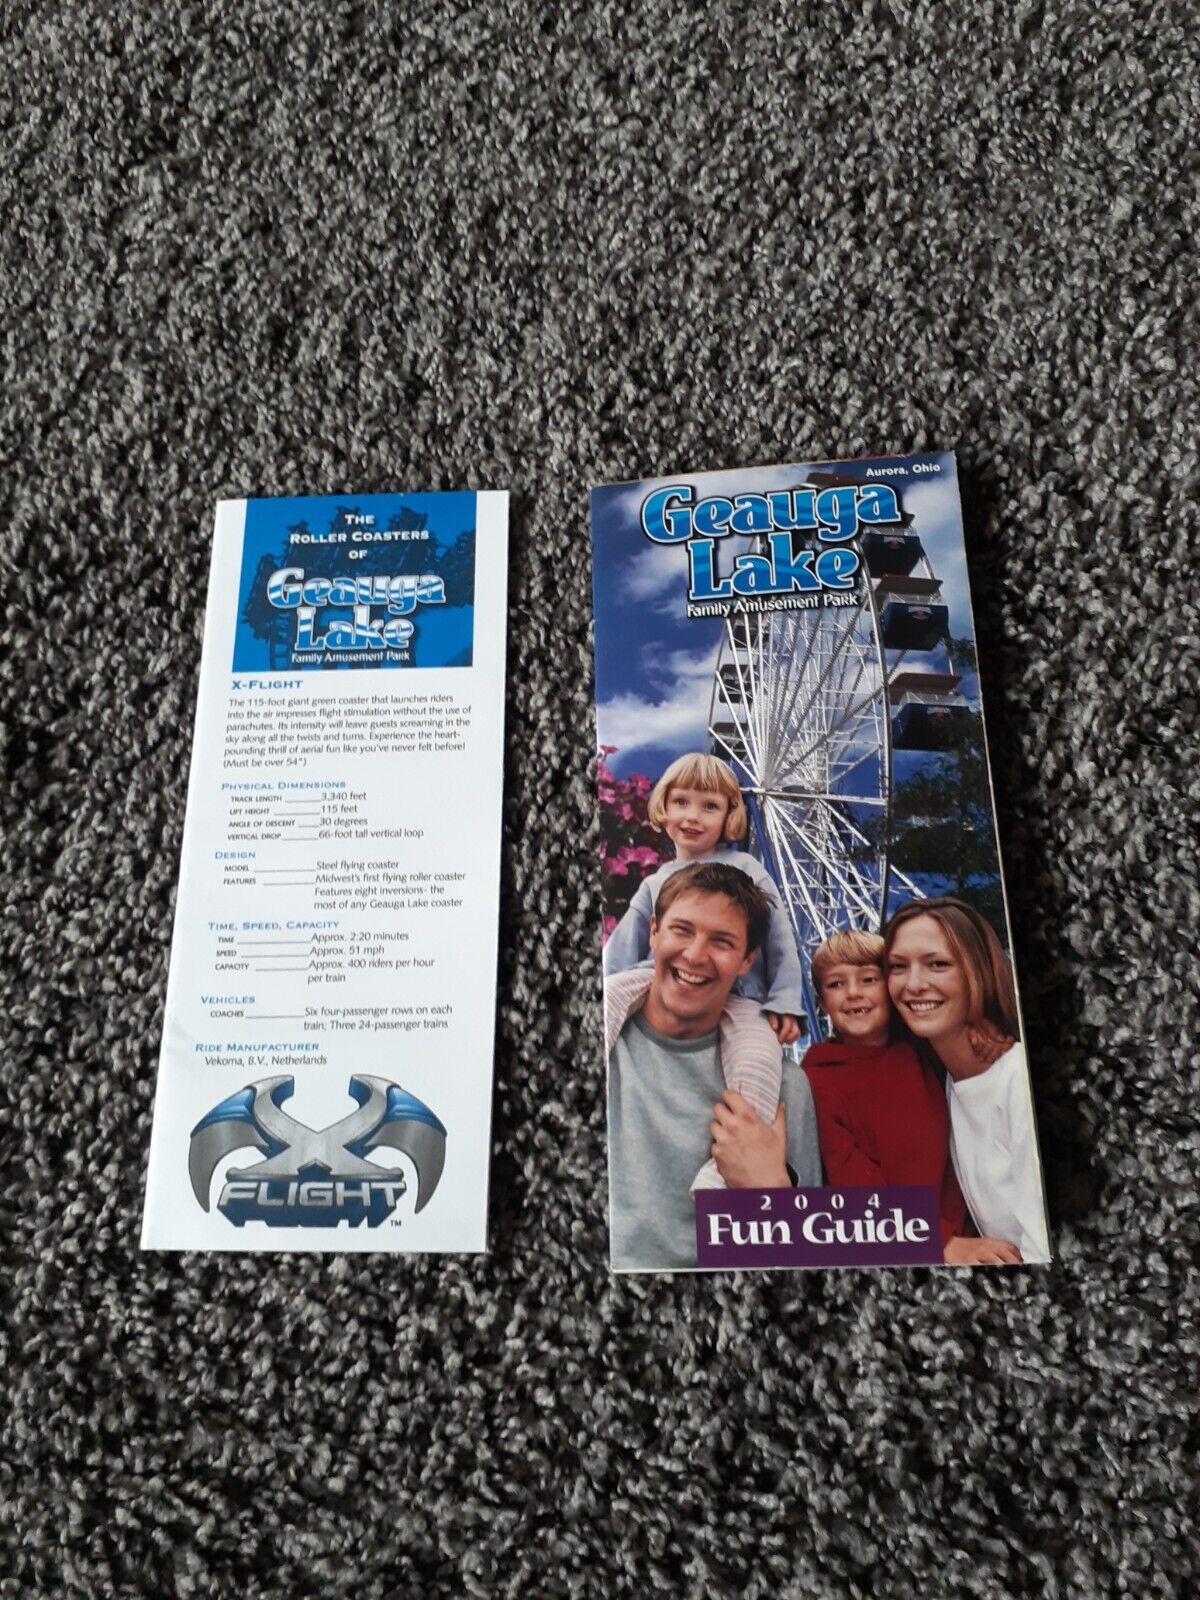 Geauga Lake 2004 Brochure And Roller Coasters